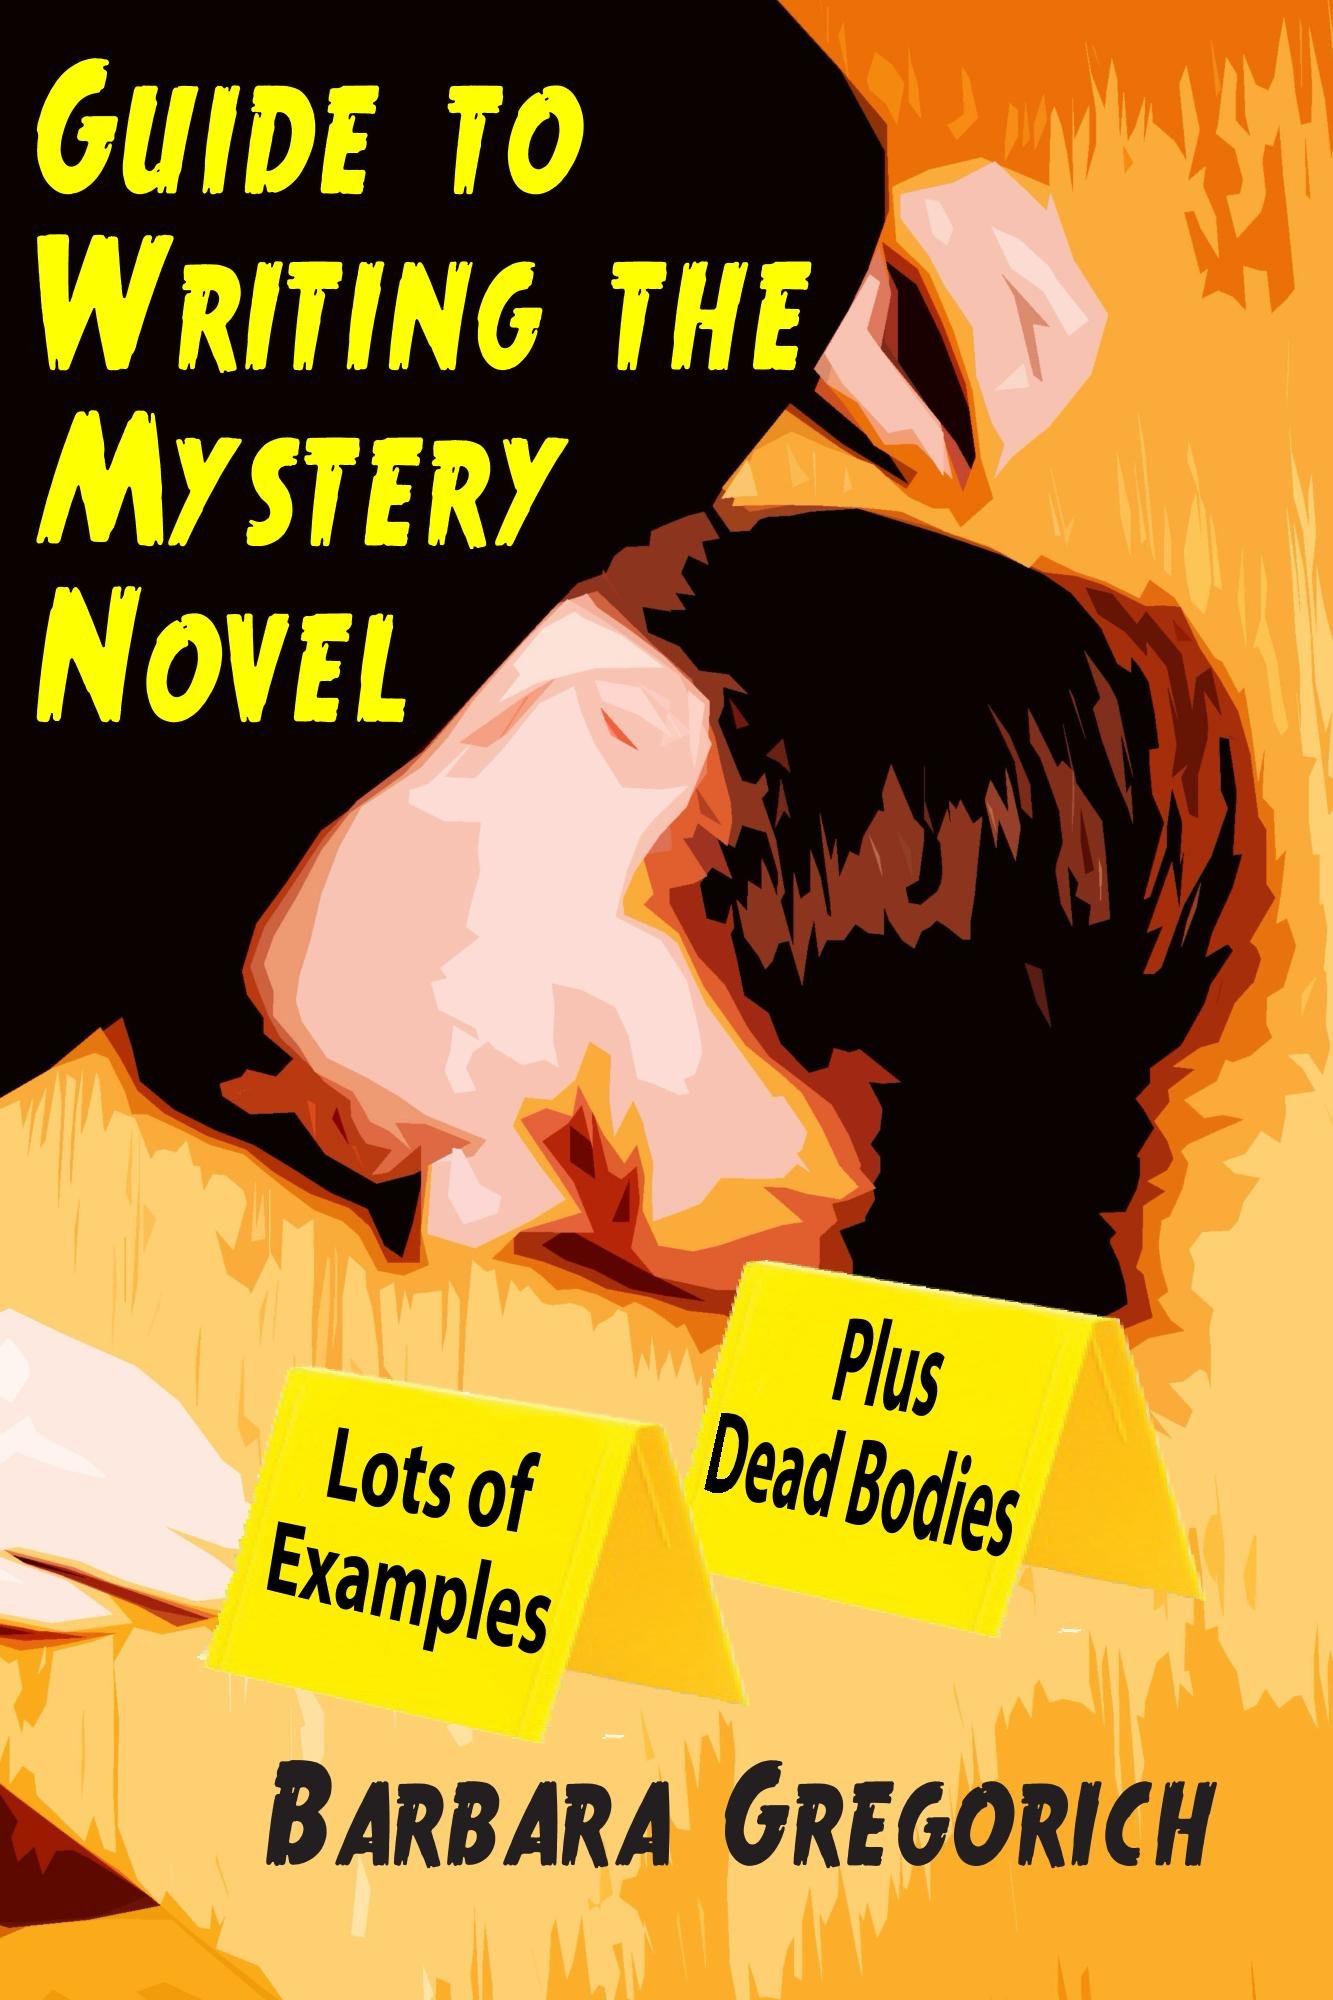 Guide to Writing the Mystery Novel: Lots of Examples, Plus Dead Bodies